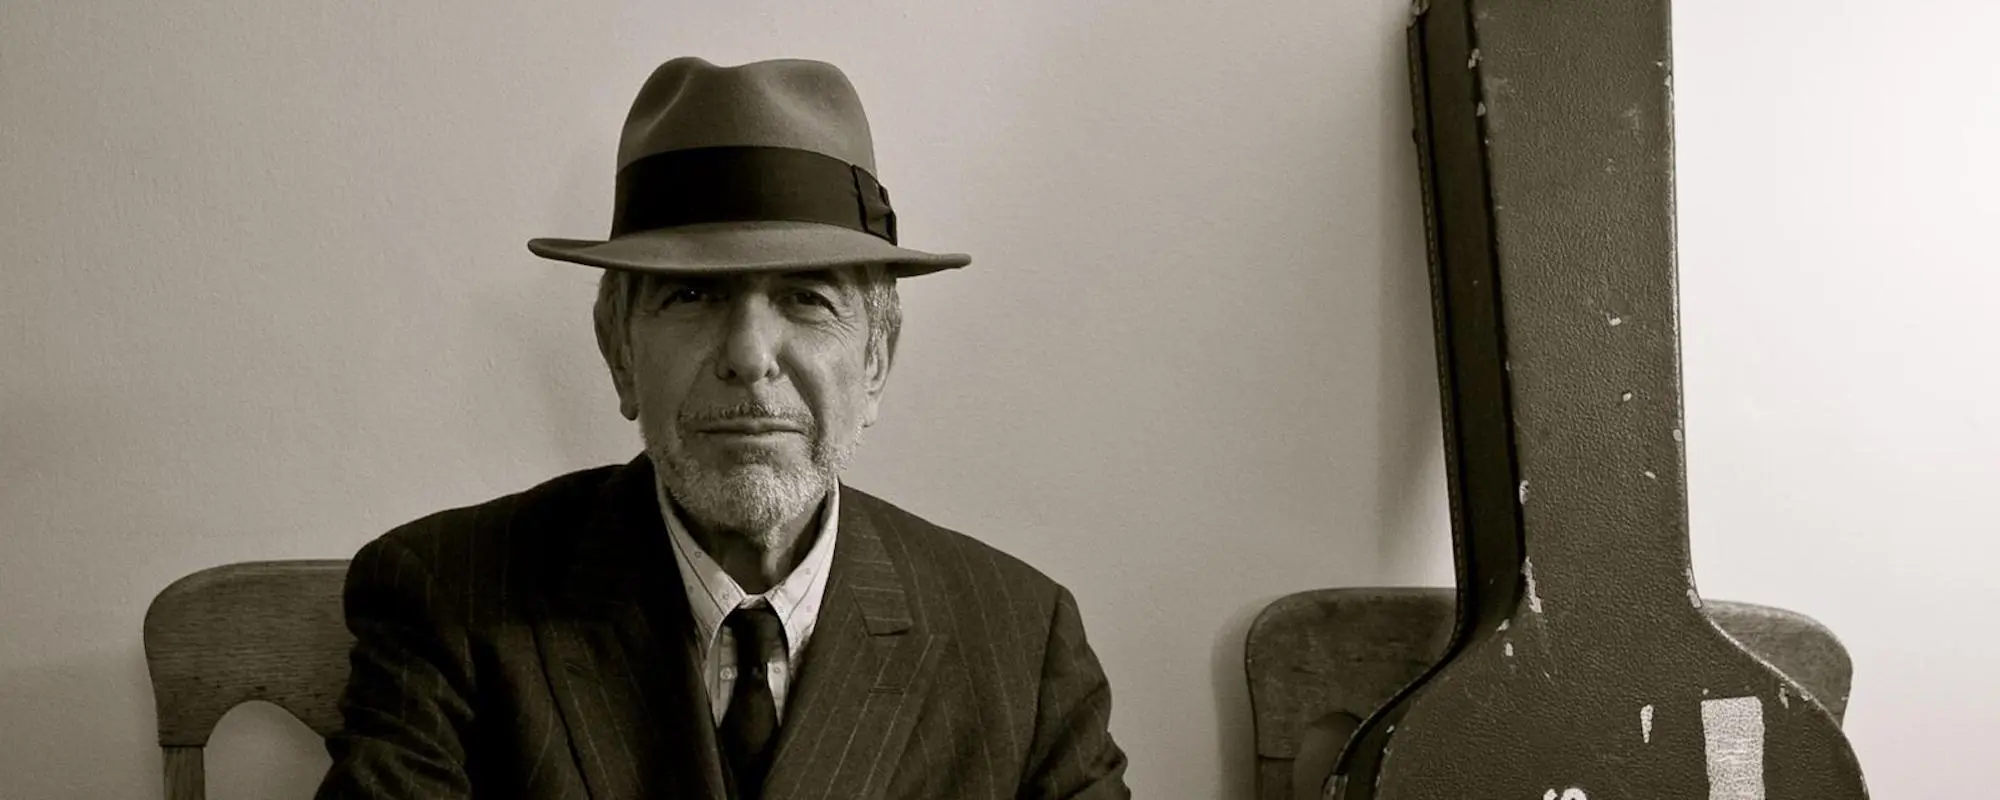 Behind The Meaning of “Hallelujah” by Leonard Cohen